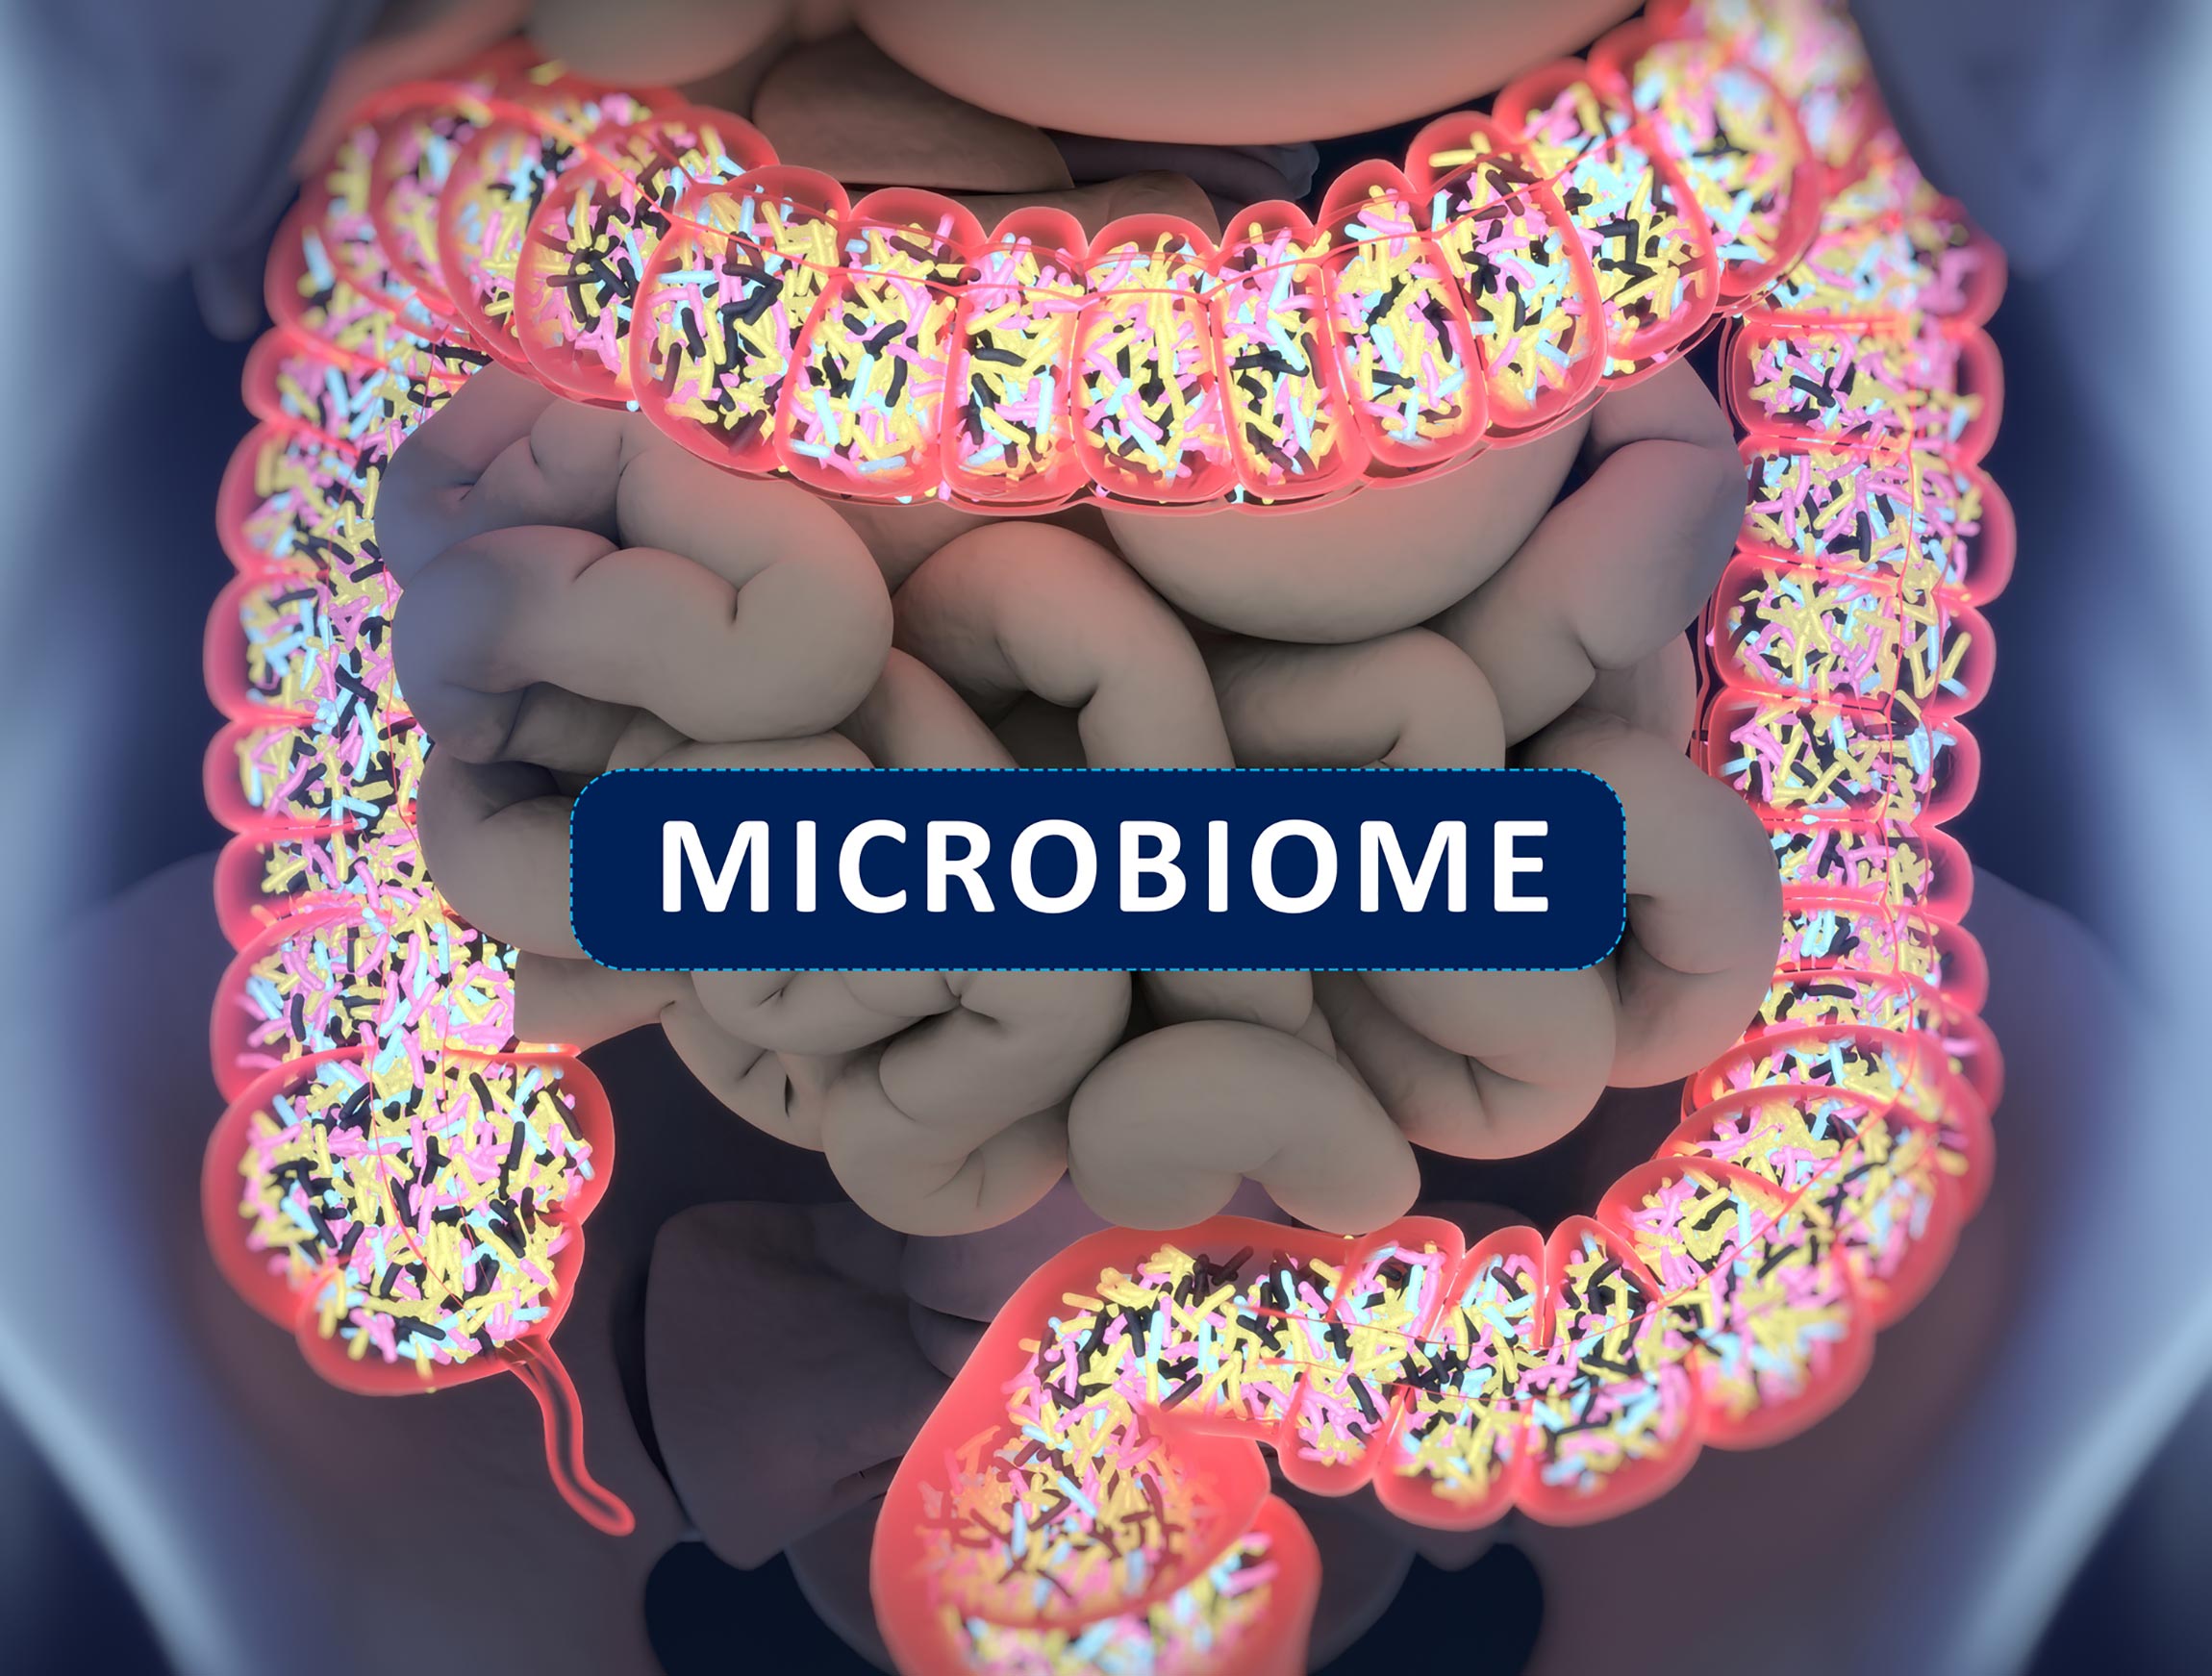 graphical depiction of intestines with the word microbiome